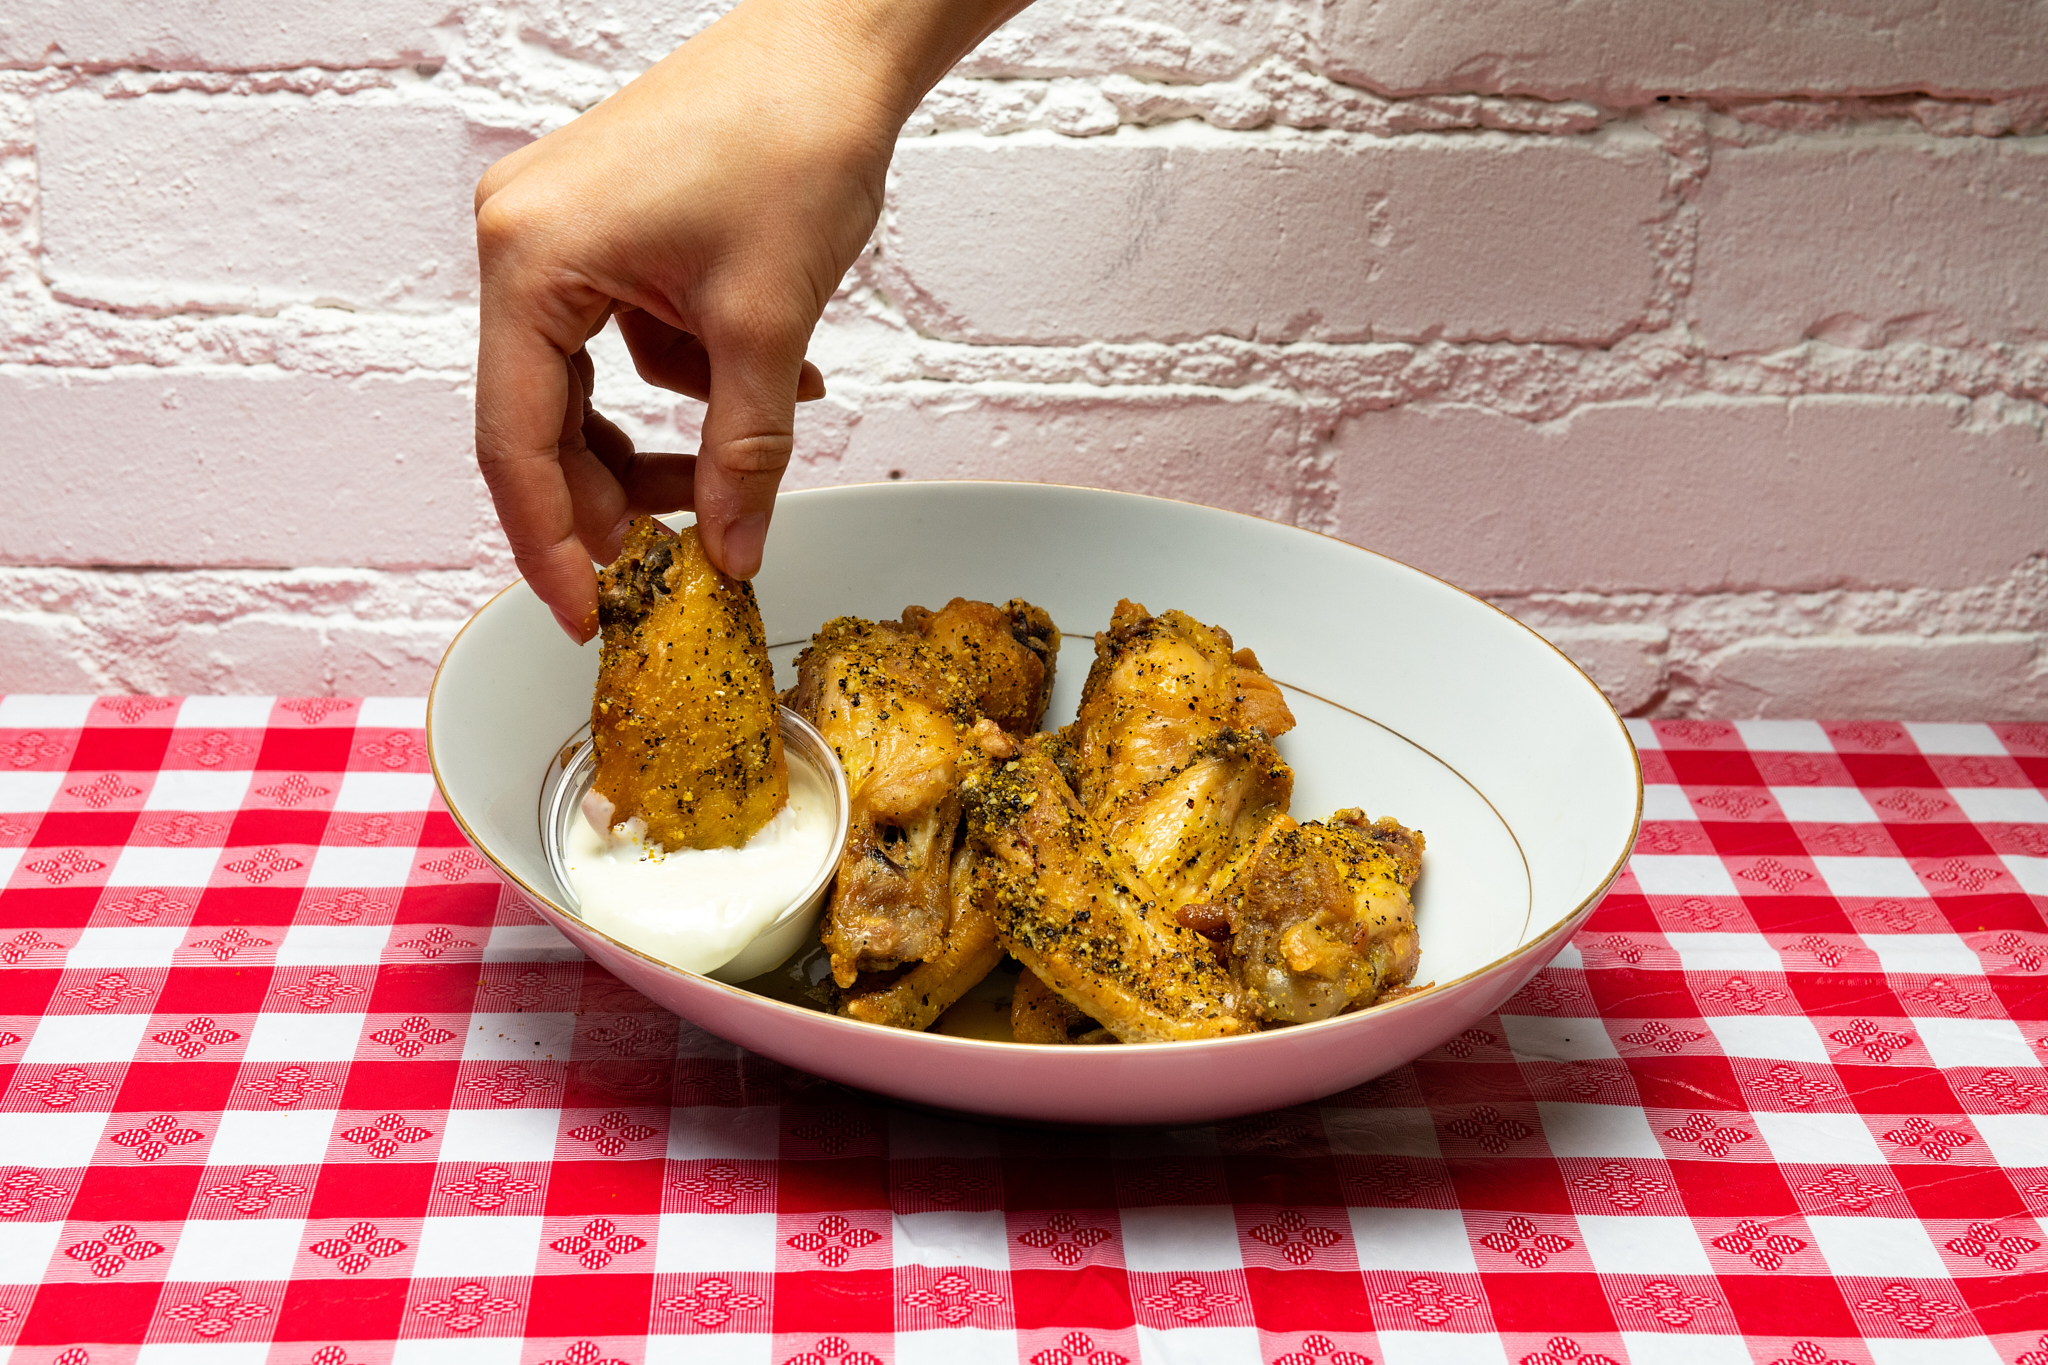 A hand grabs a chicken wing coated in spices from a bowl and dips it into a white sauce.